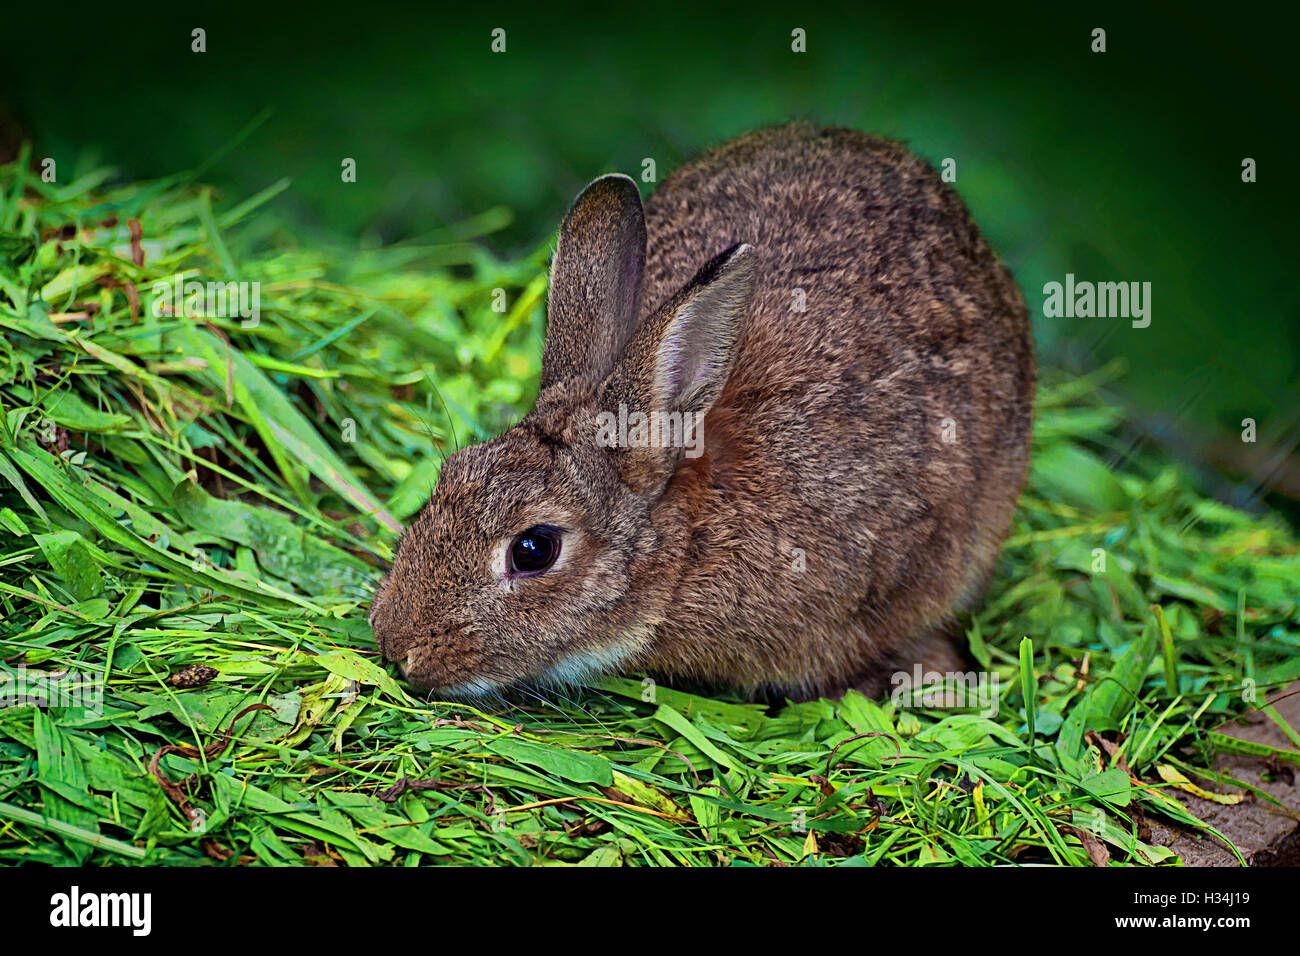 Farm  animal, brown rabbit squatted on green grass eating Stock Photo